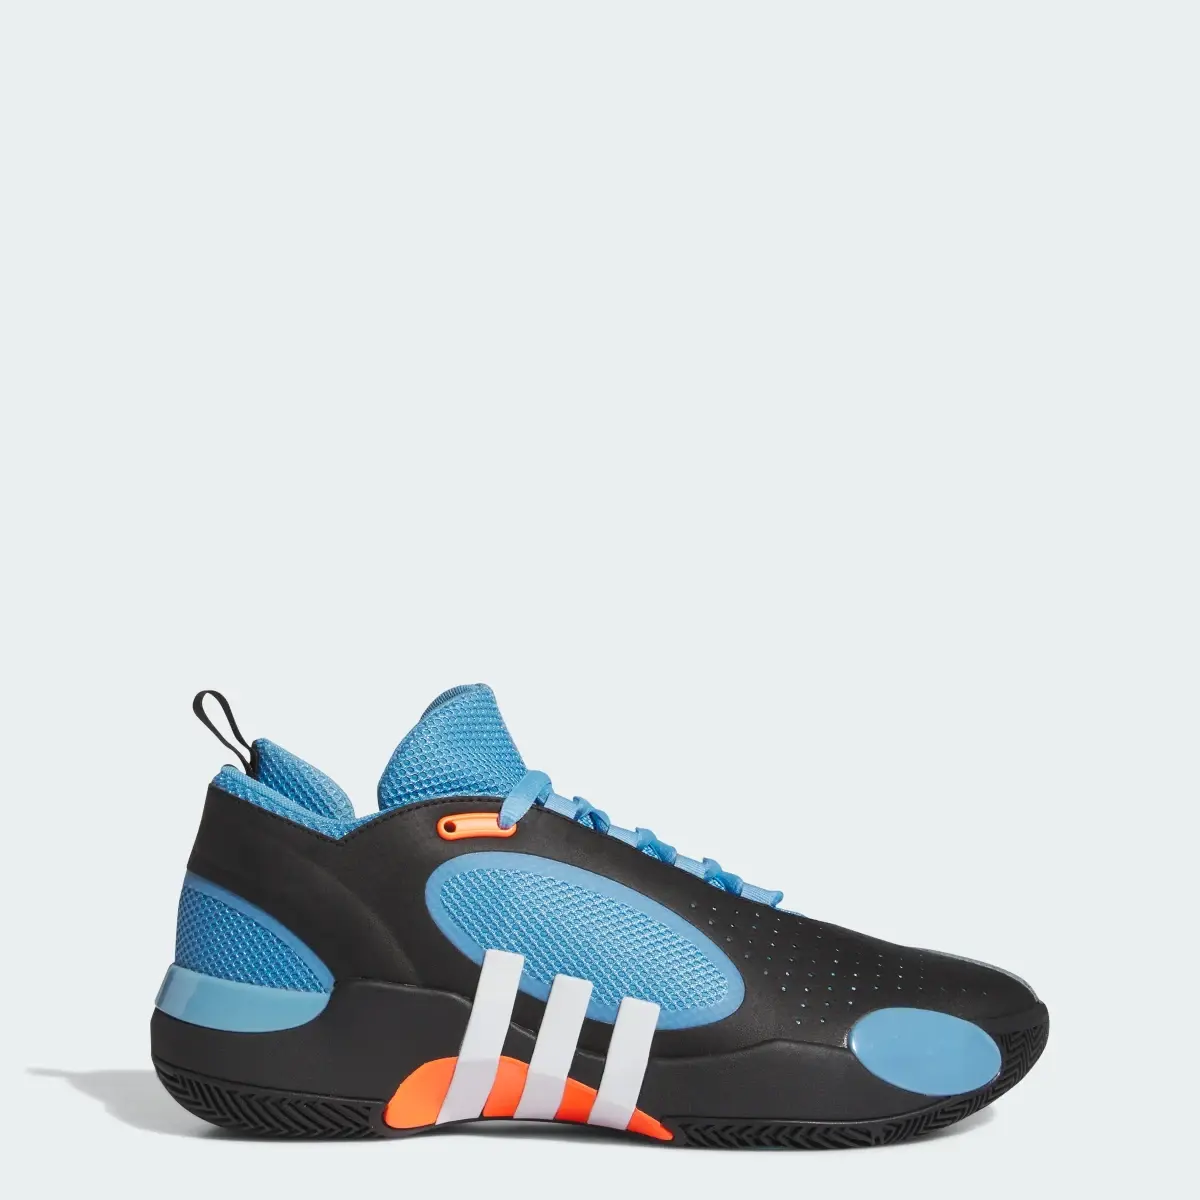 Adidas D.O.N. Issue 5 Shoes. 1